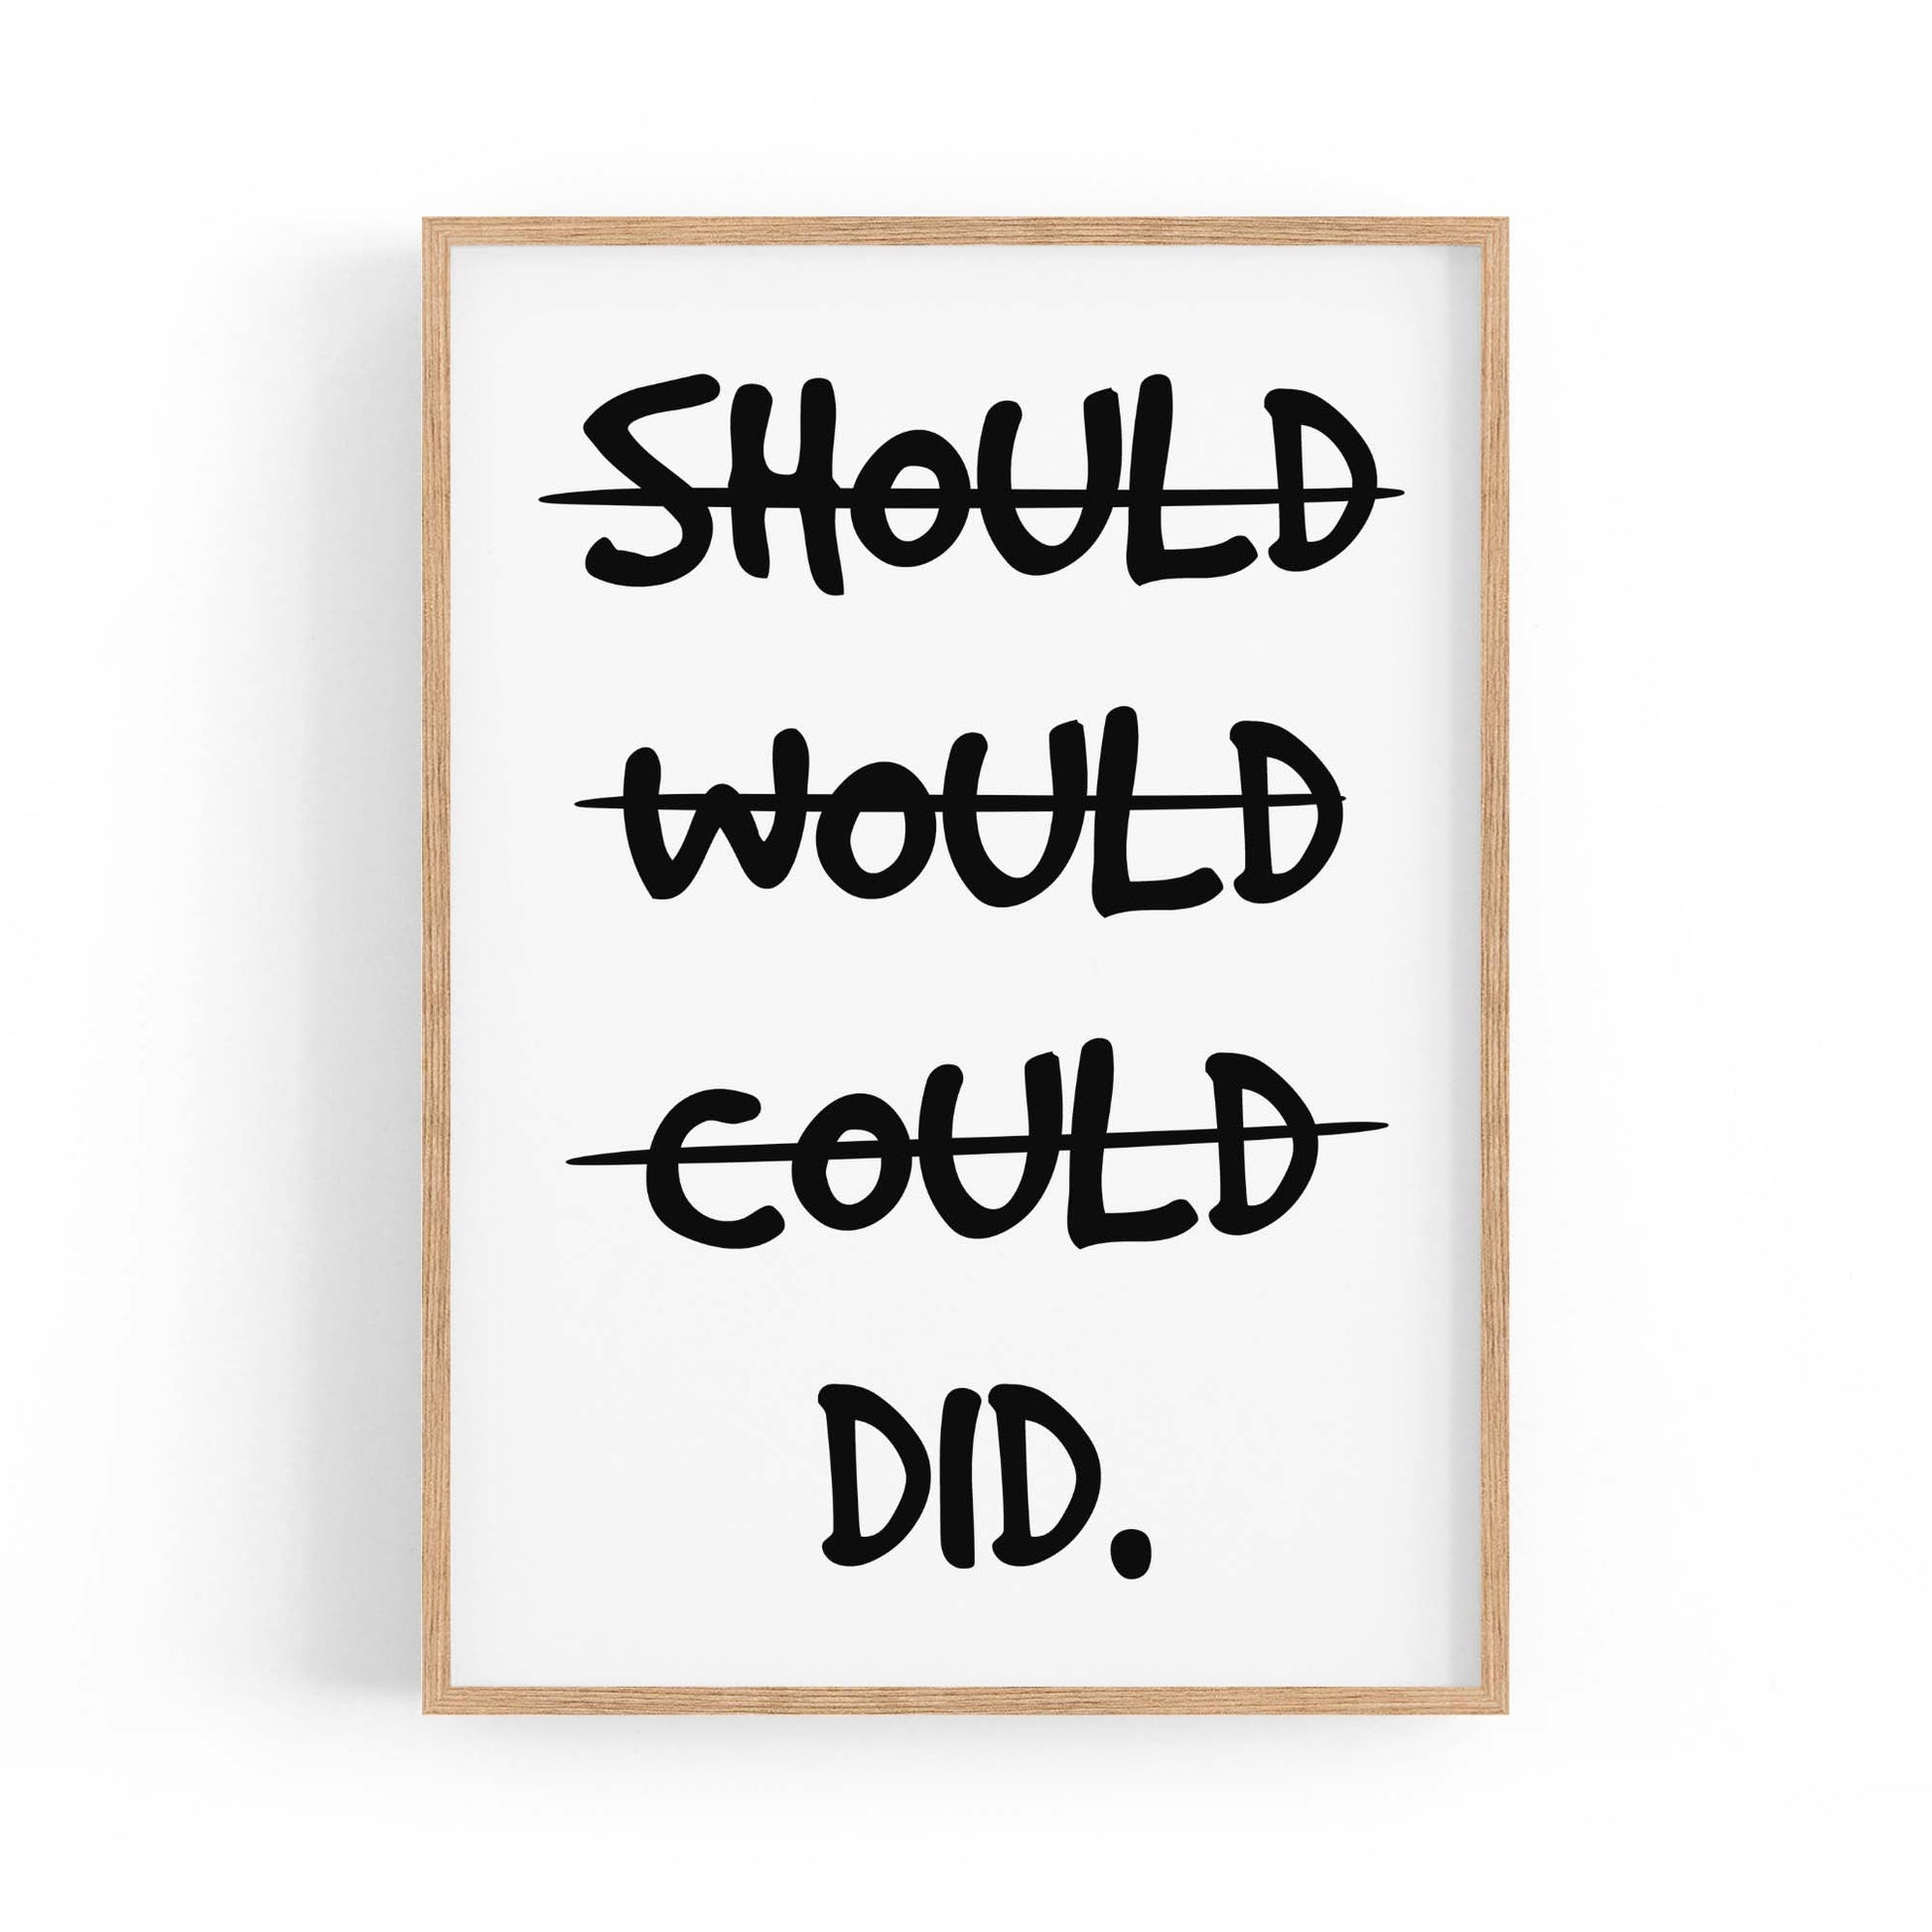 "Should, Would, Could - DID" Fitness Quote Wall Art - The Affordable Art Company